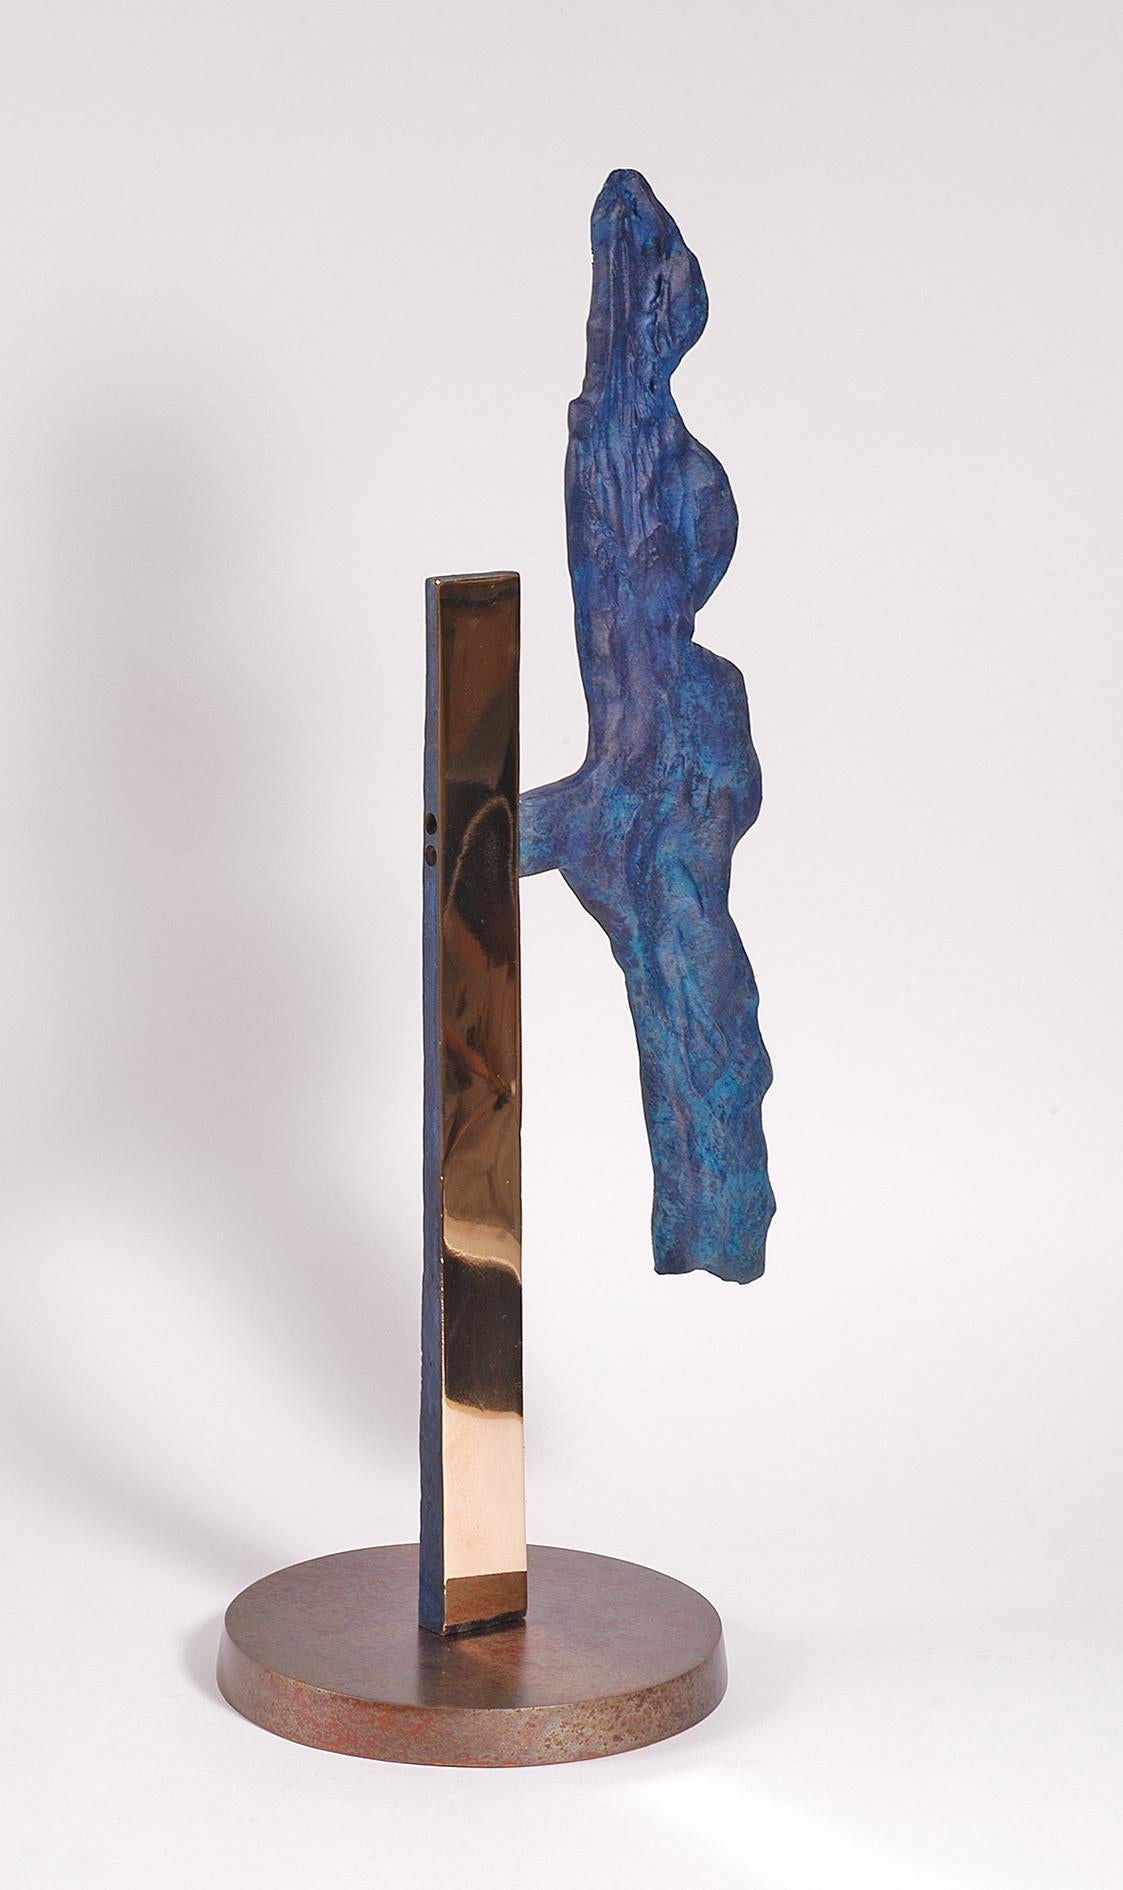 With a background in architecture, interior and furniture design, Philip Hearsey is self-taught sculptor and specialised in sandcasting to make pieces which engage the quality of bronze as a noble material in its own right. Sculptures are intimate